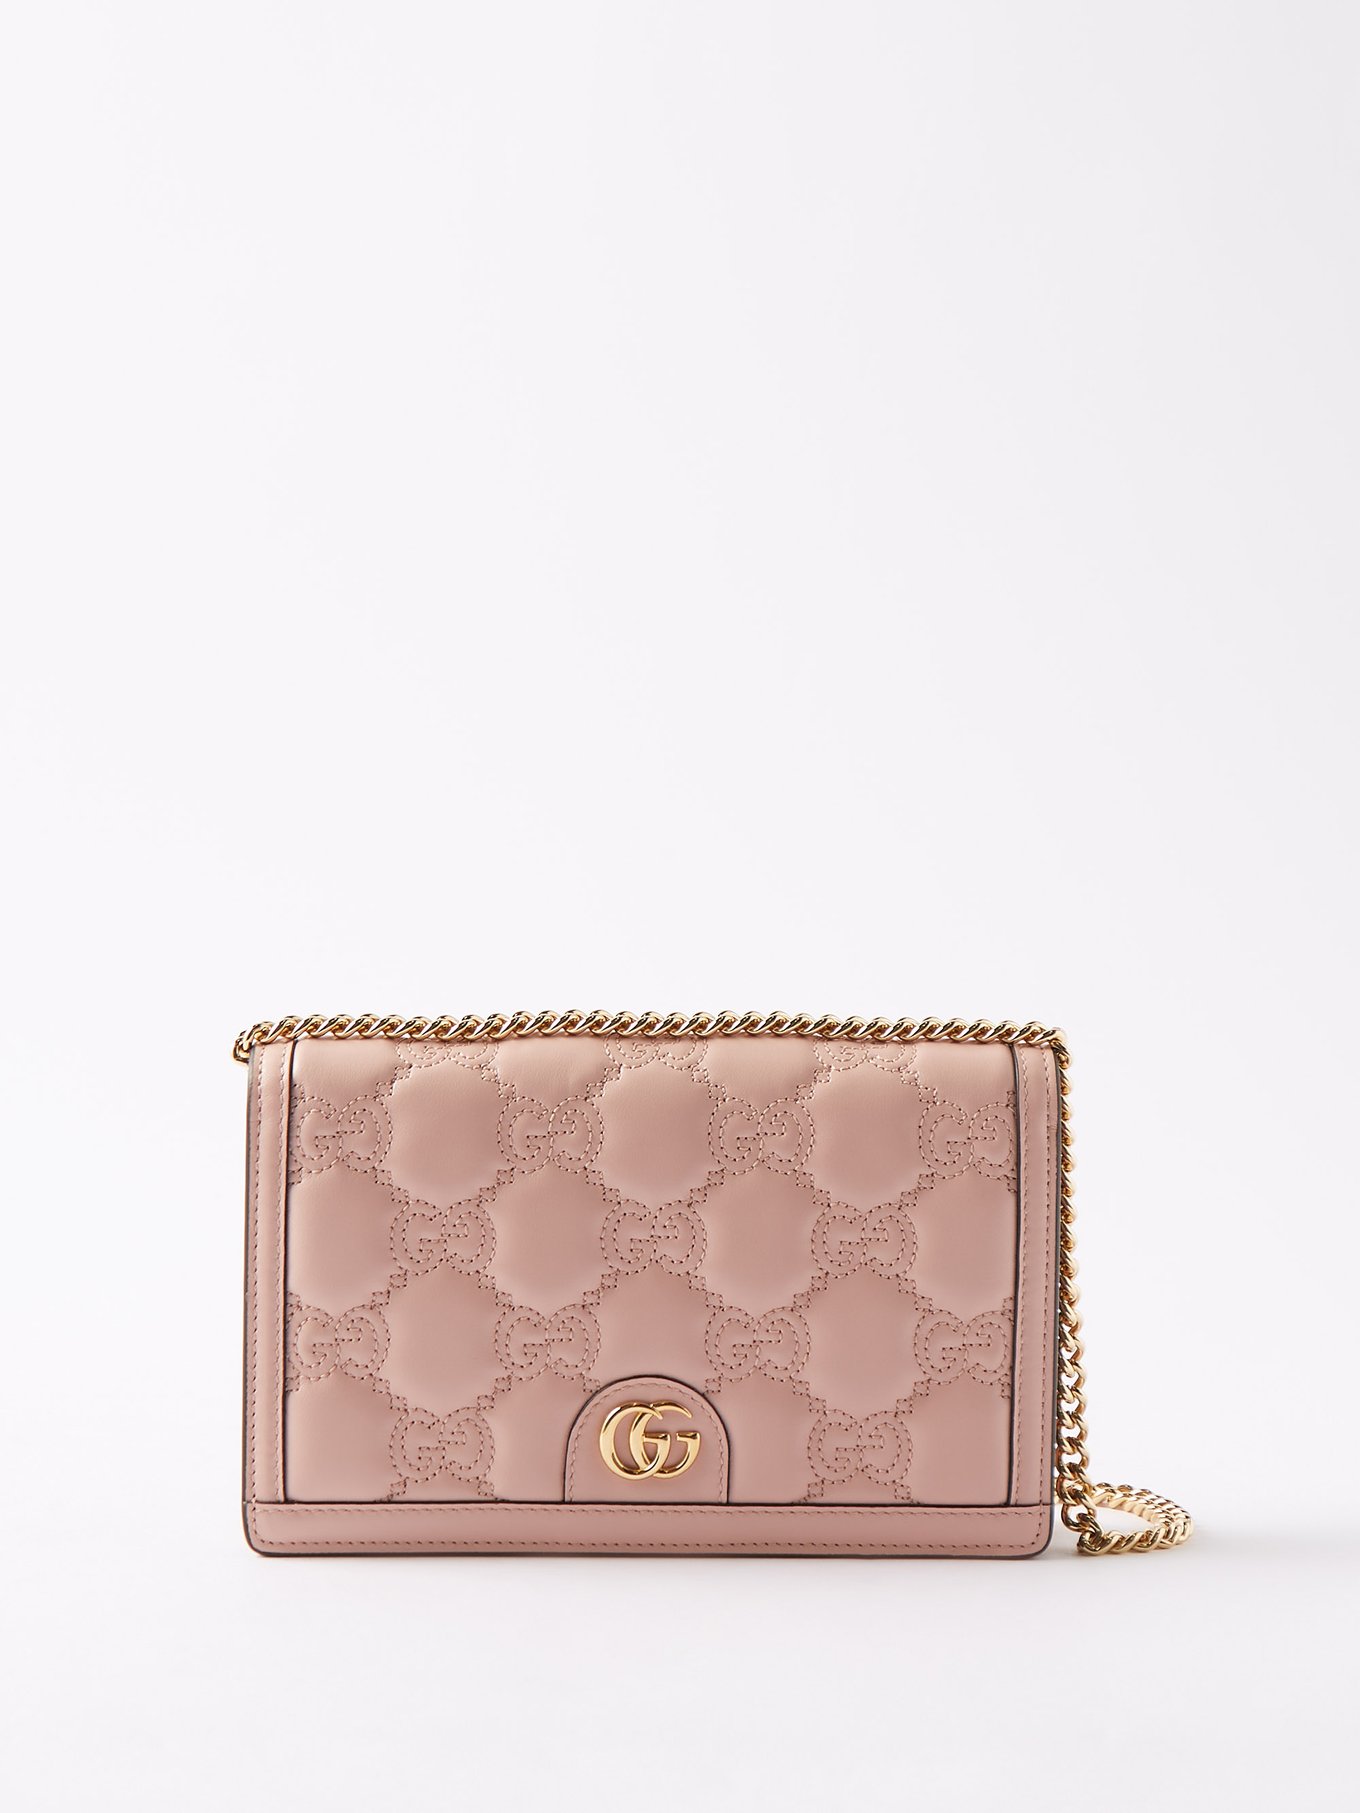 Gucci Monogram-Embossed Leather Wallet